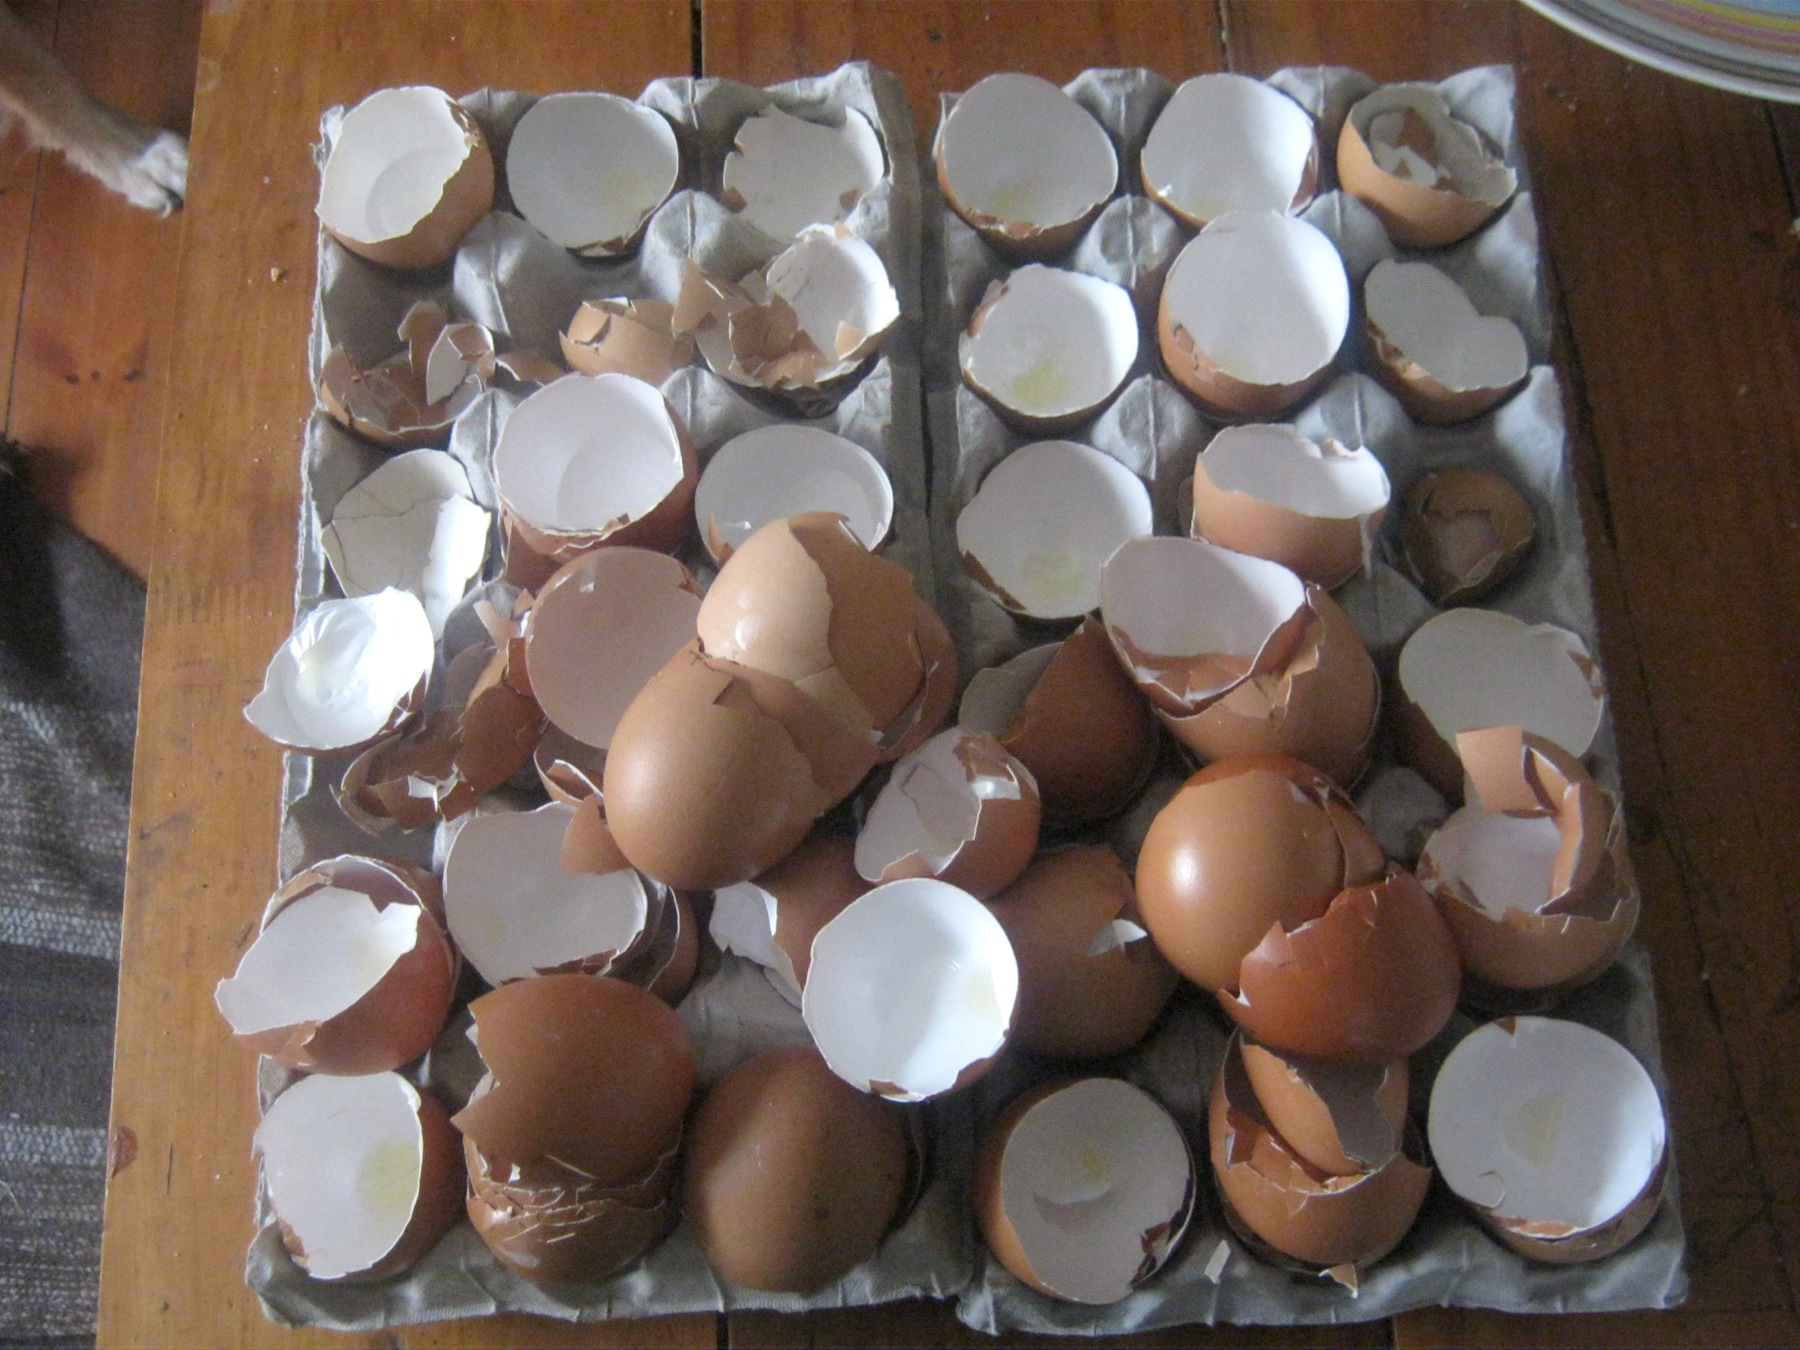 Cracked egg shells on egg cartons to be processed to worm food